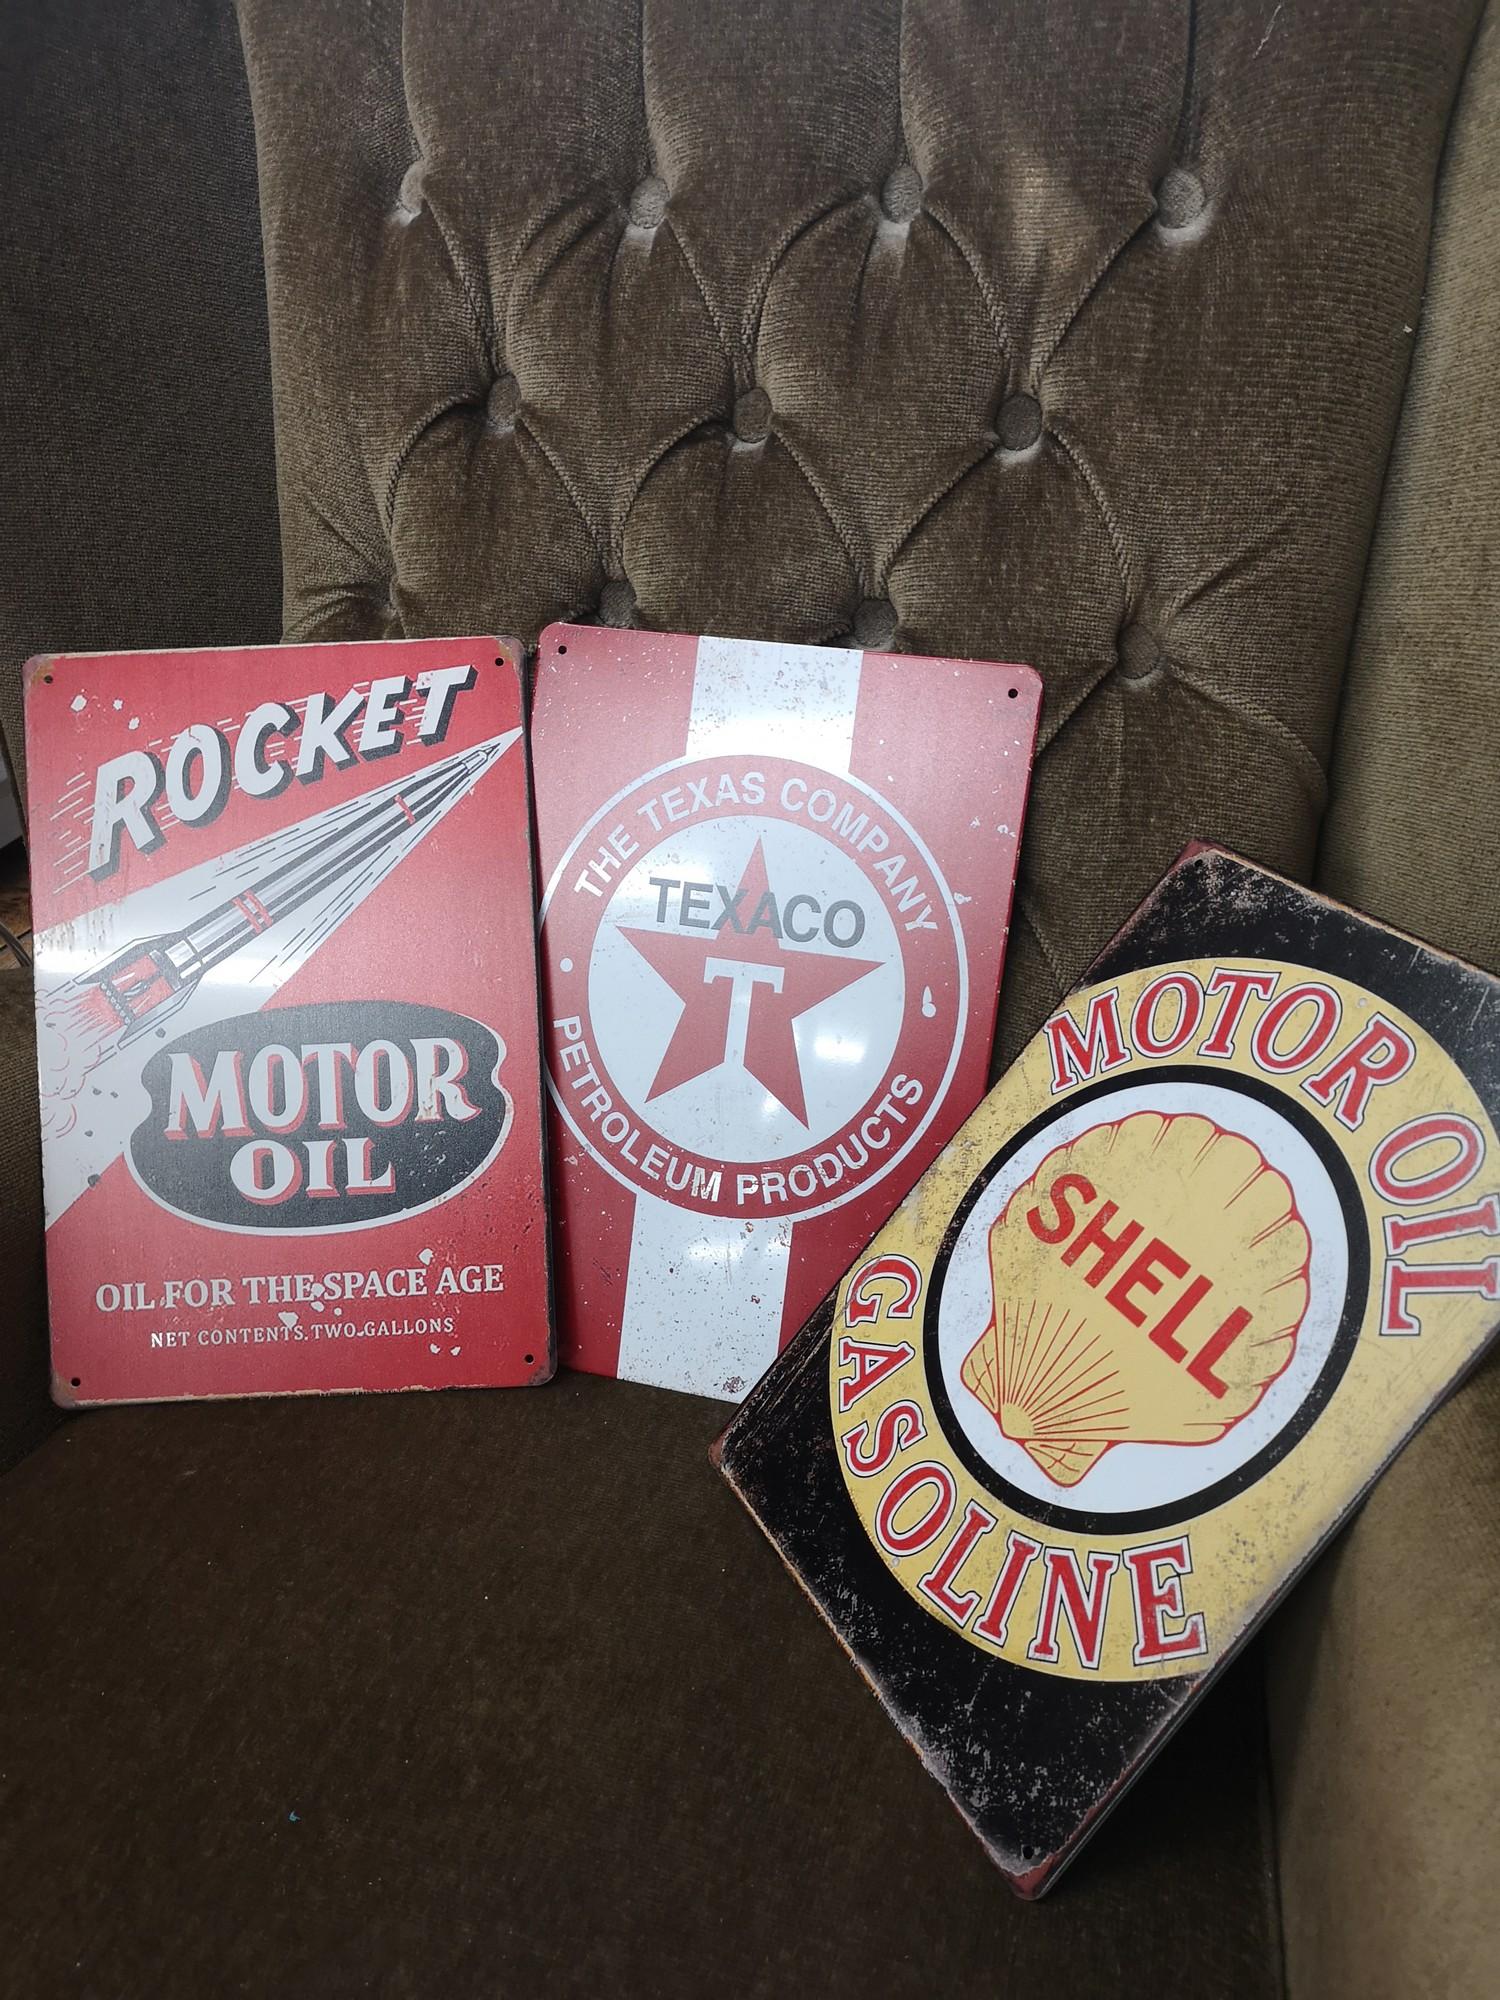 3 vintage style signs.